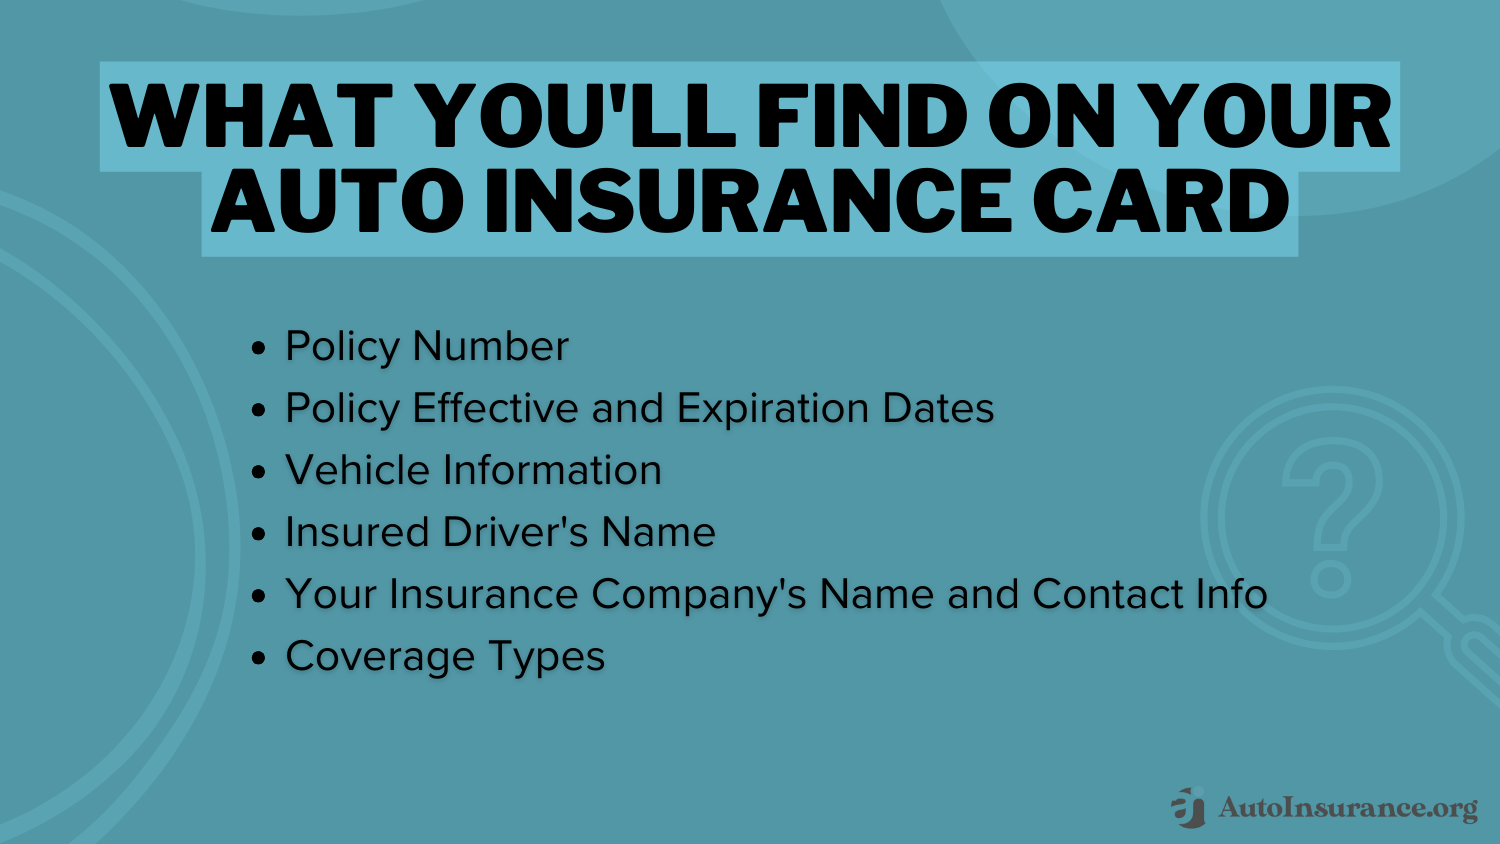 What You'll Find on Your Auto Insurance Card: Does your car need to be registered to get auto insurance?